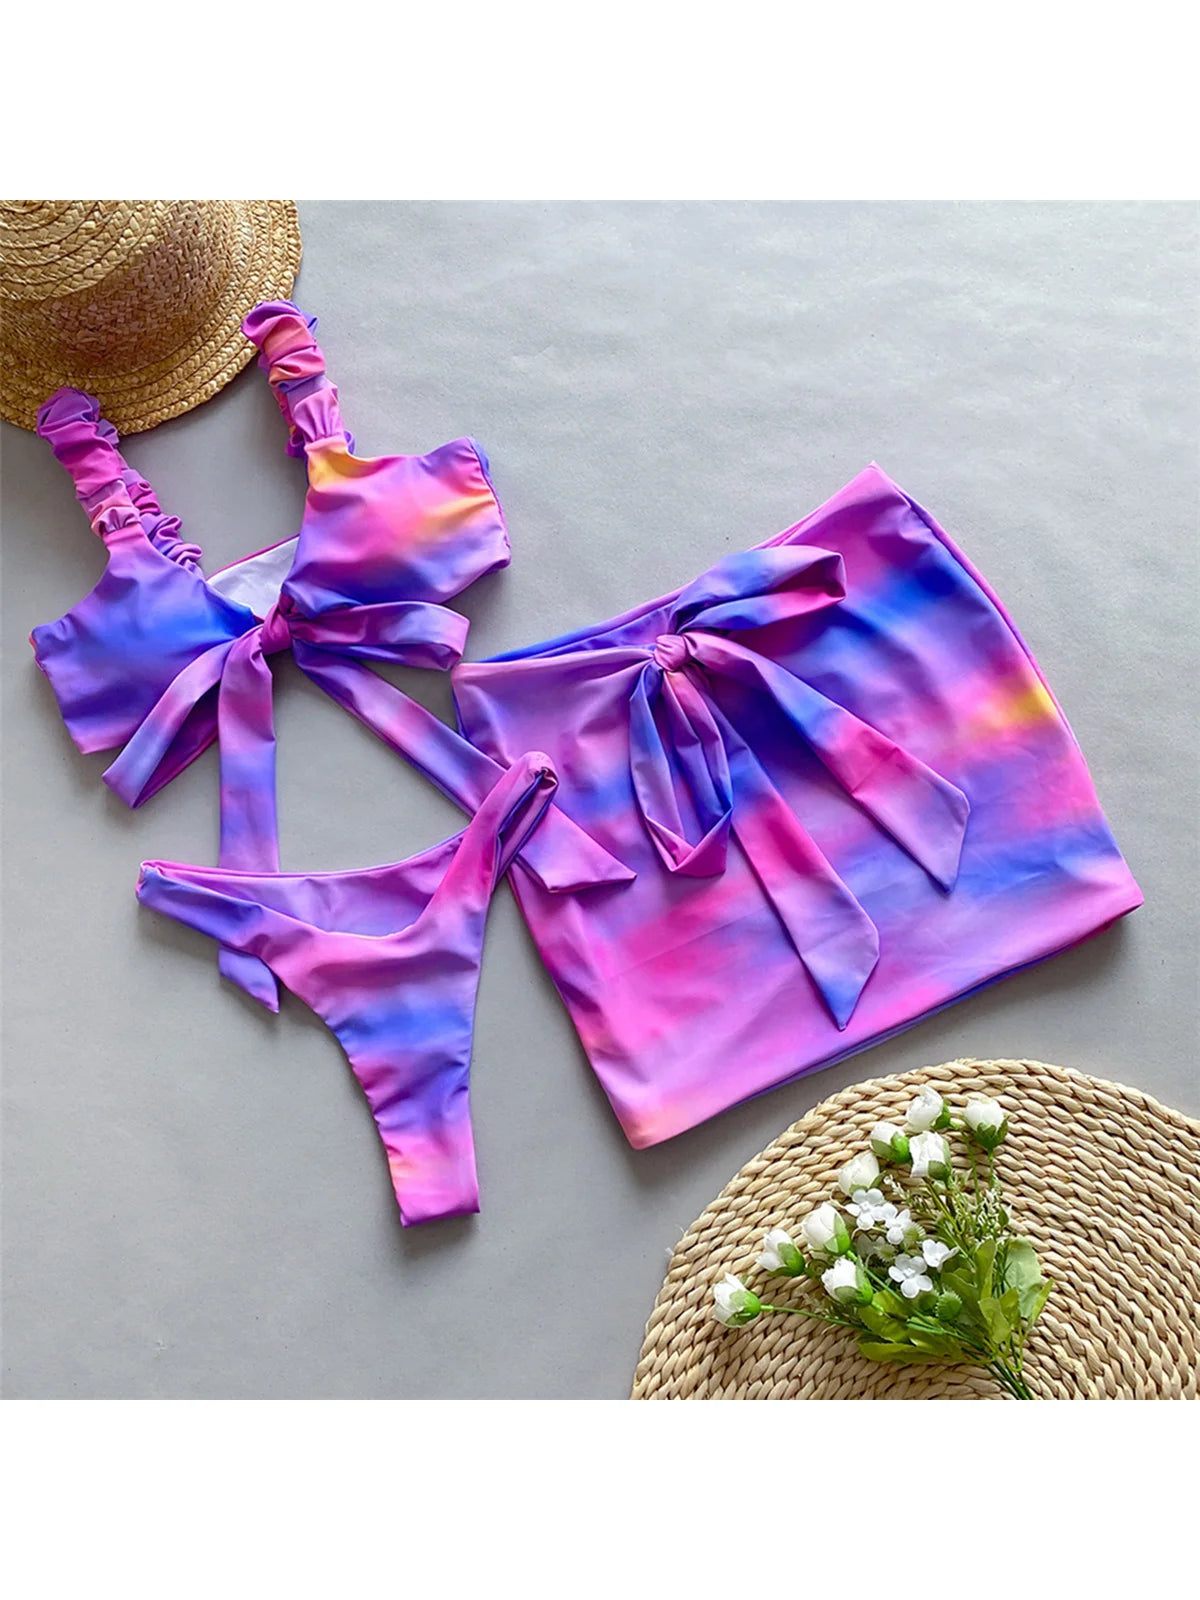 Tie Dye Knotted High Cut Bikini Set with Skirt, Three Piece Set, Made of Nylon and Spandex, Wire Free, Low Waist, True to Size, Available in Women Sizes Small, Medium, and Large, Radiant Purple Tie Dye Color, CUVATI Brand, Free Shipping.